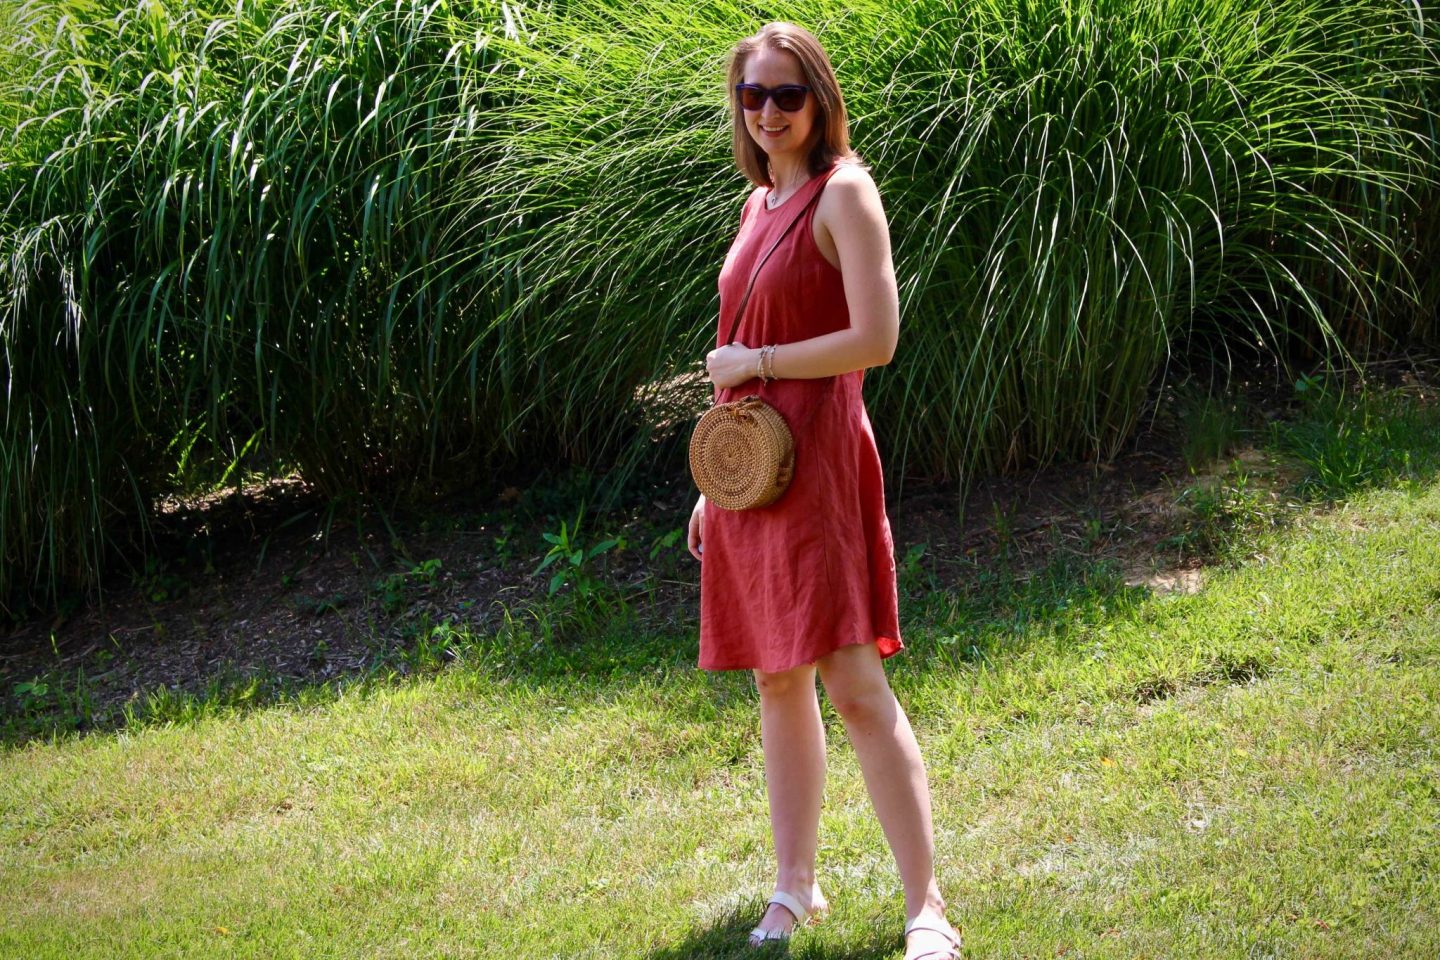 Red Linen Dress with Straw Purse ... The Spectacular Adventurer